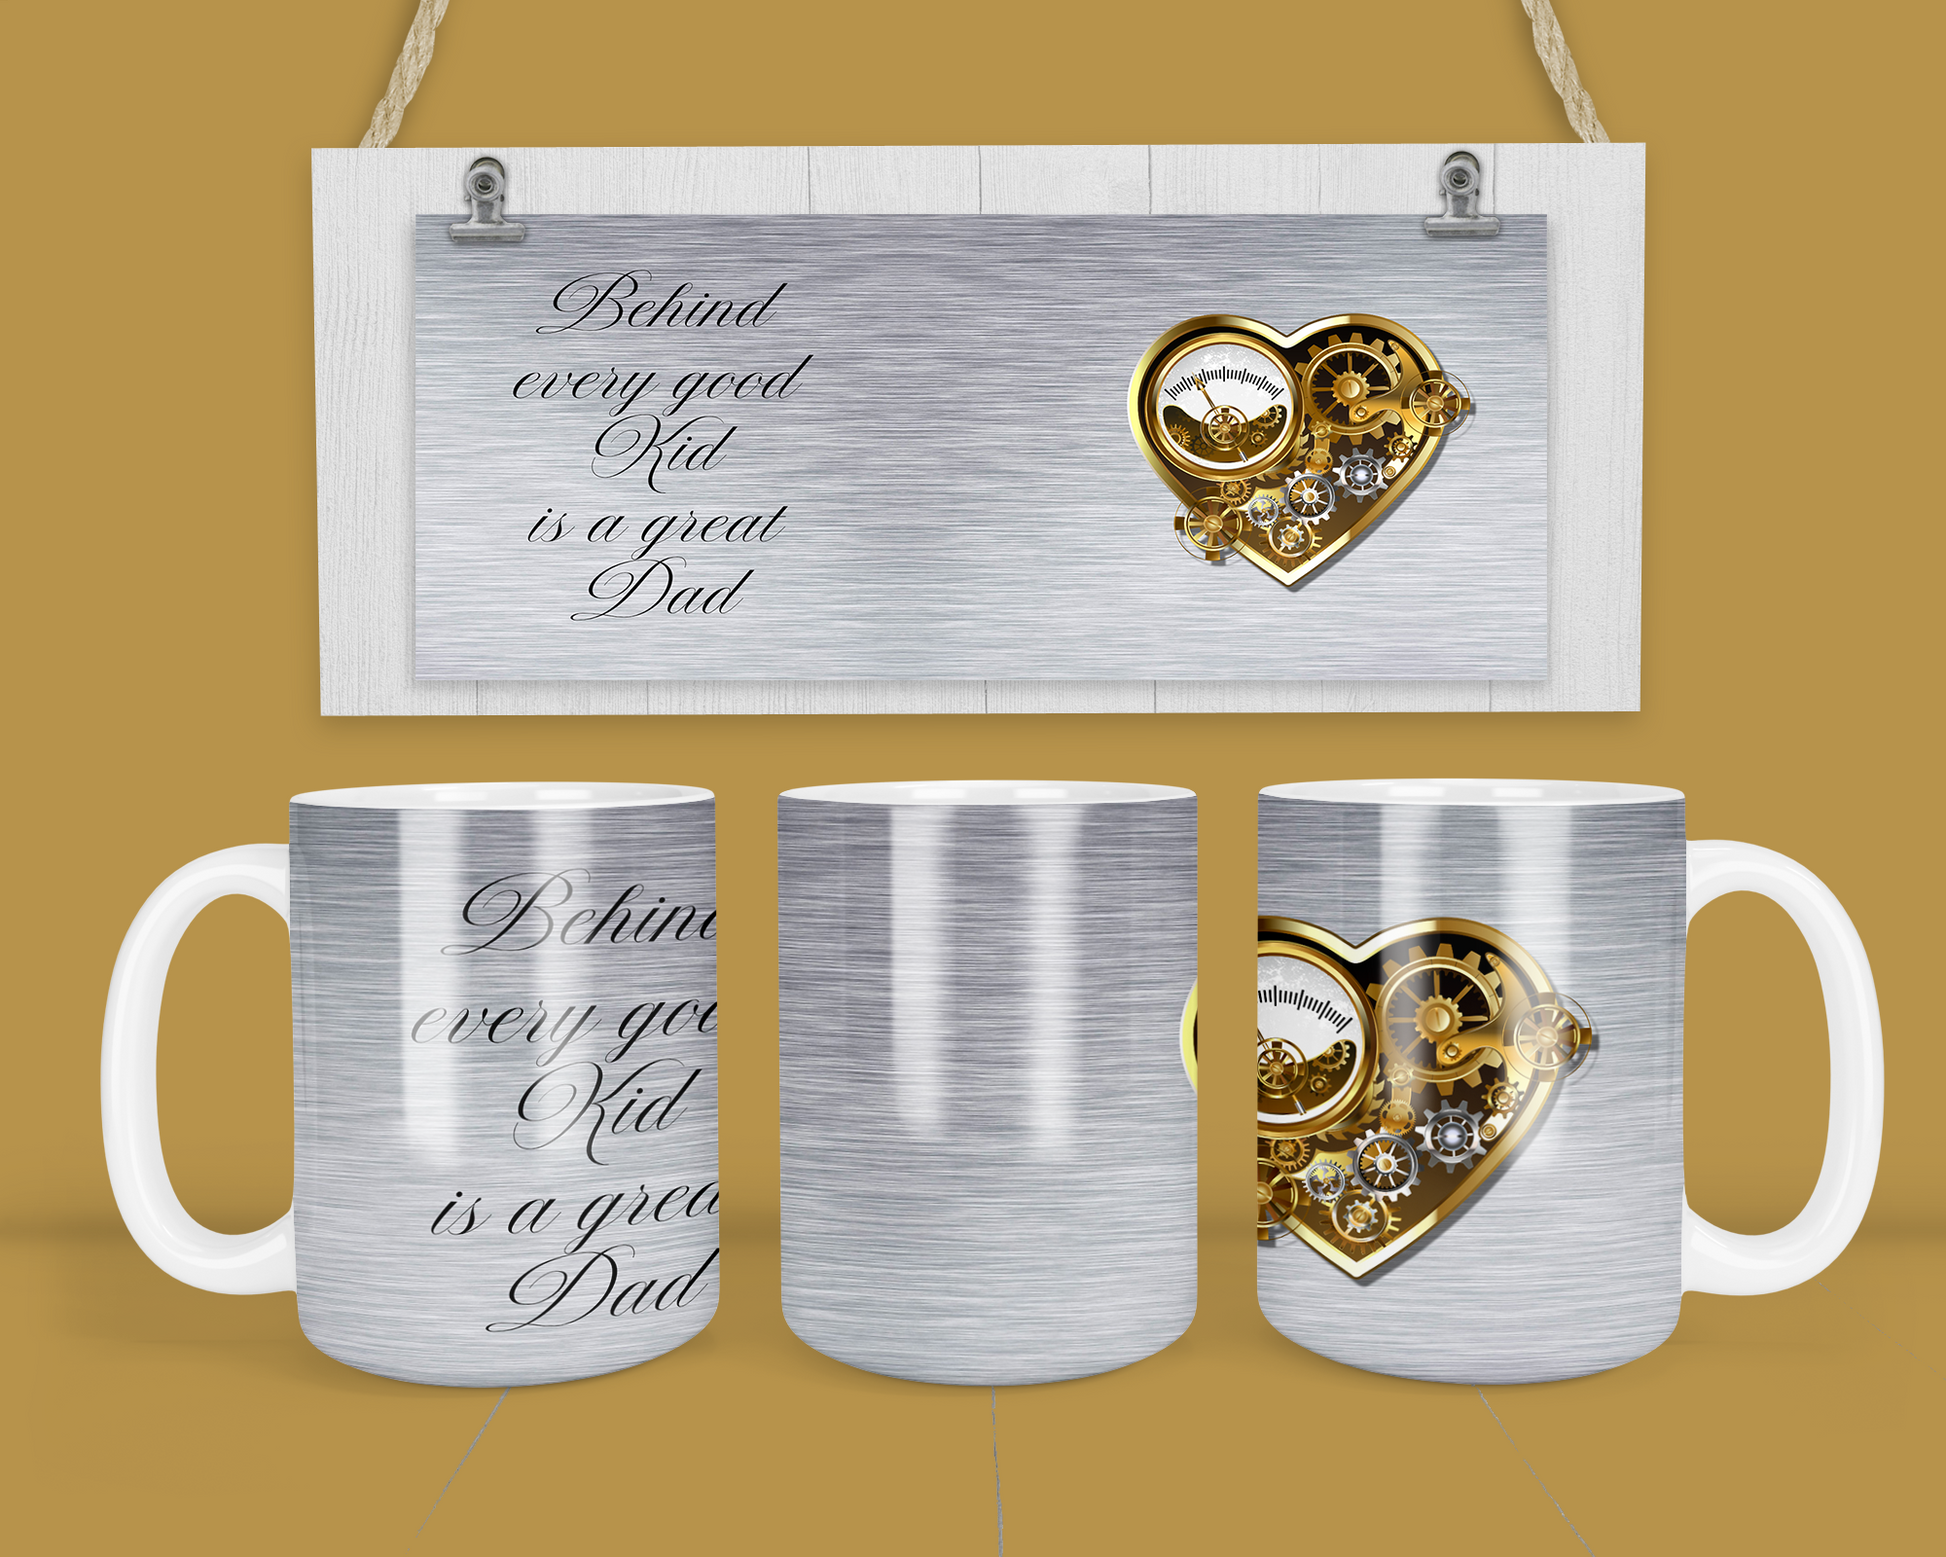 "Celebrate the hardworking and loving fathers in your life with this 11 oz mug. Featuring a gold heart-shaped gear design, it symbolizes the strength, dedication, and love that fathers bring to their families every day. A perfect gift to show your appreciation and admiration.